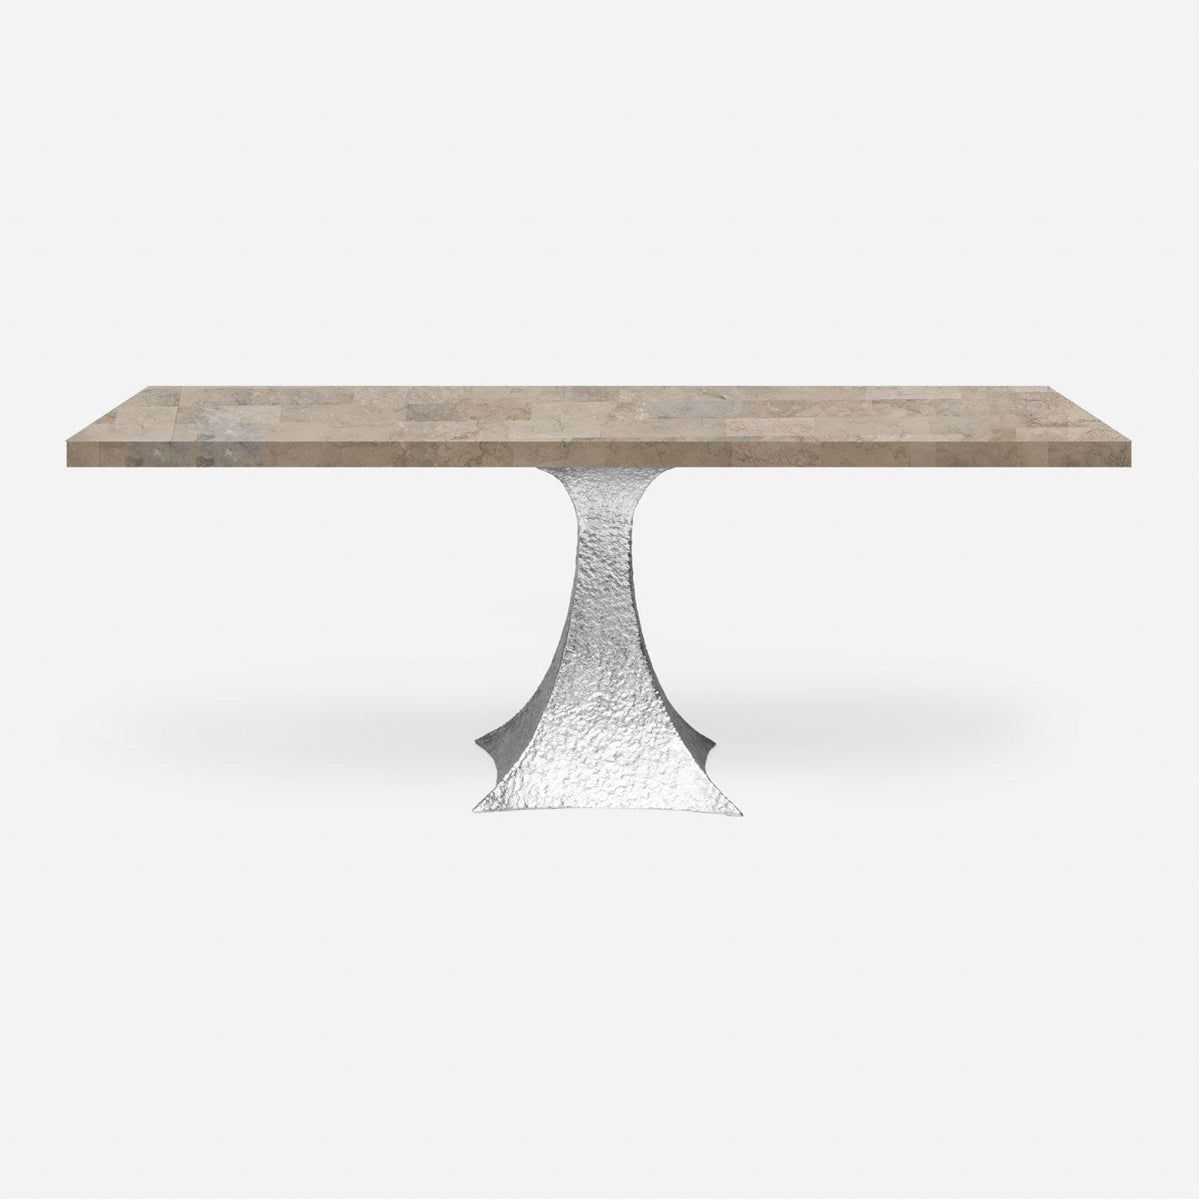 Made Goods Noor Rectangular Single Base Dining Table, Warm Gray Marble